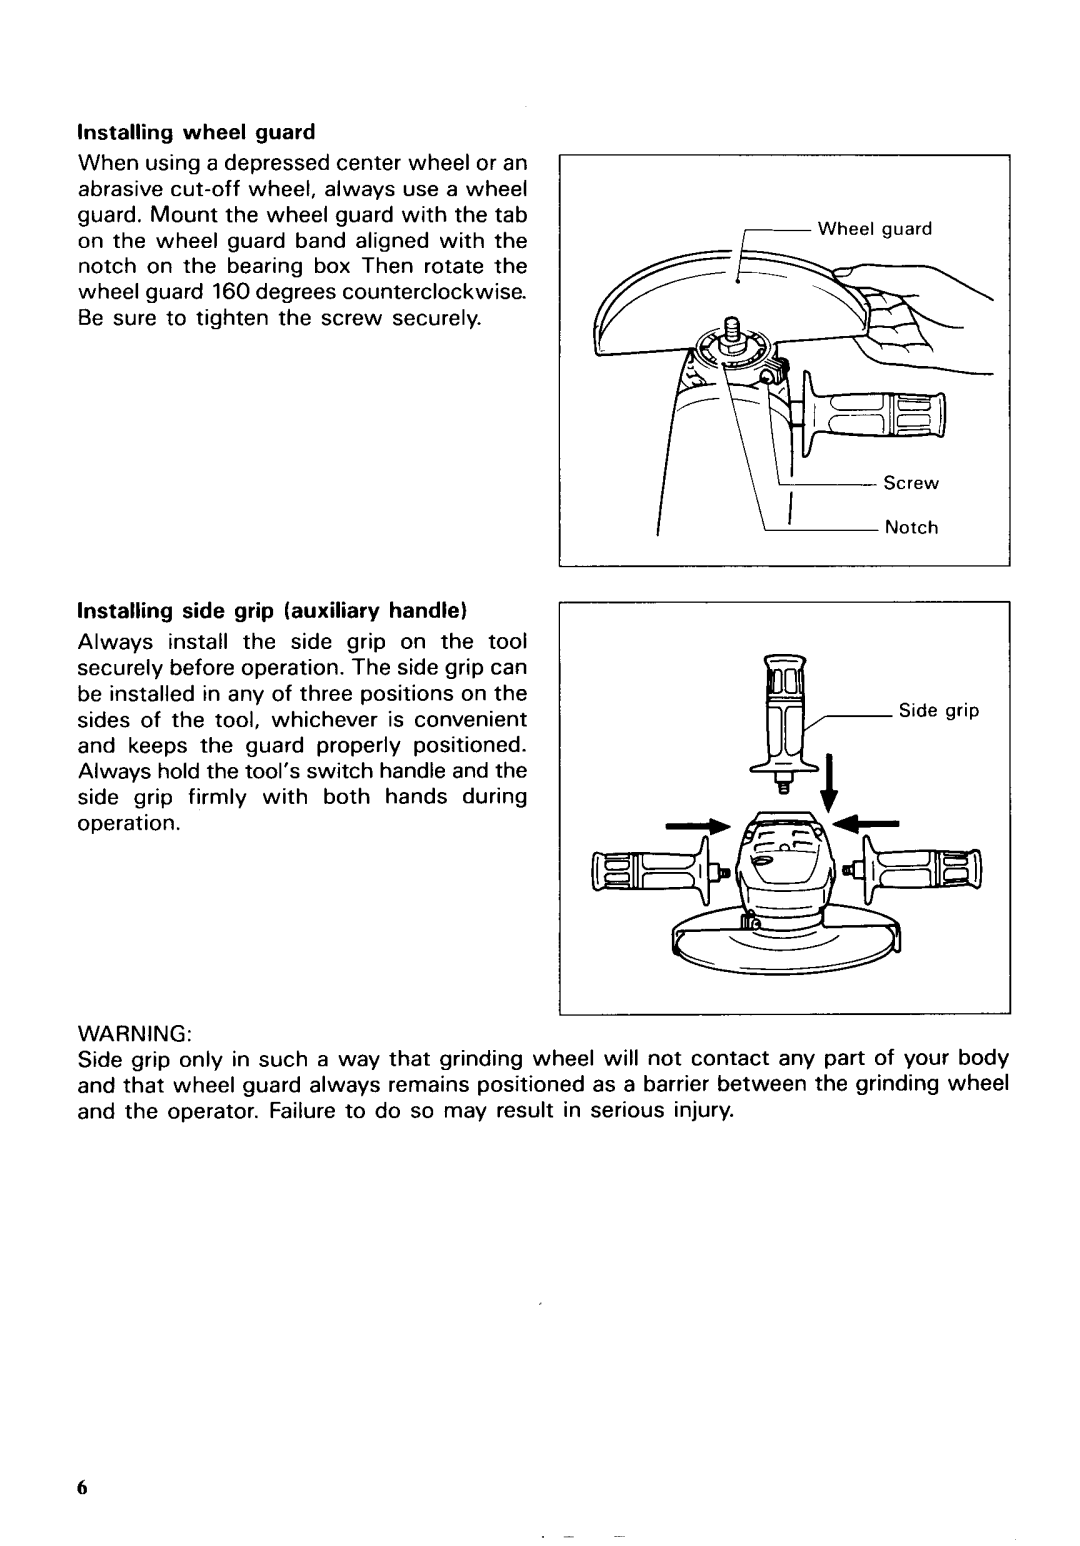 Makita 9049, 90471 instruction manual Installing wheel guard, Installing side grip auxiliary handle 